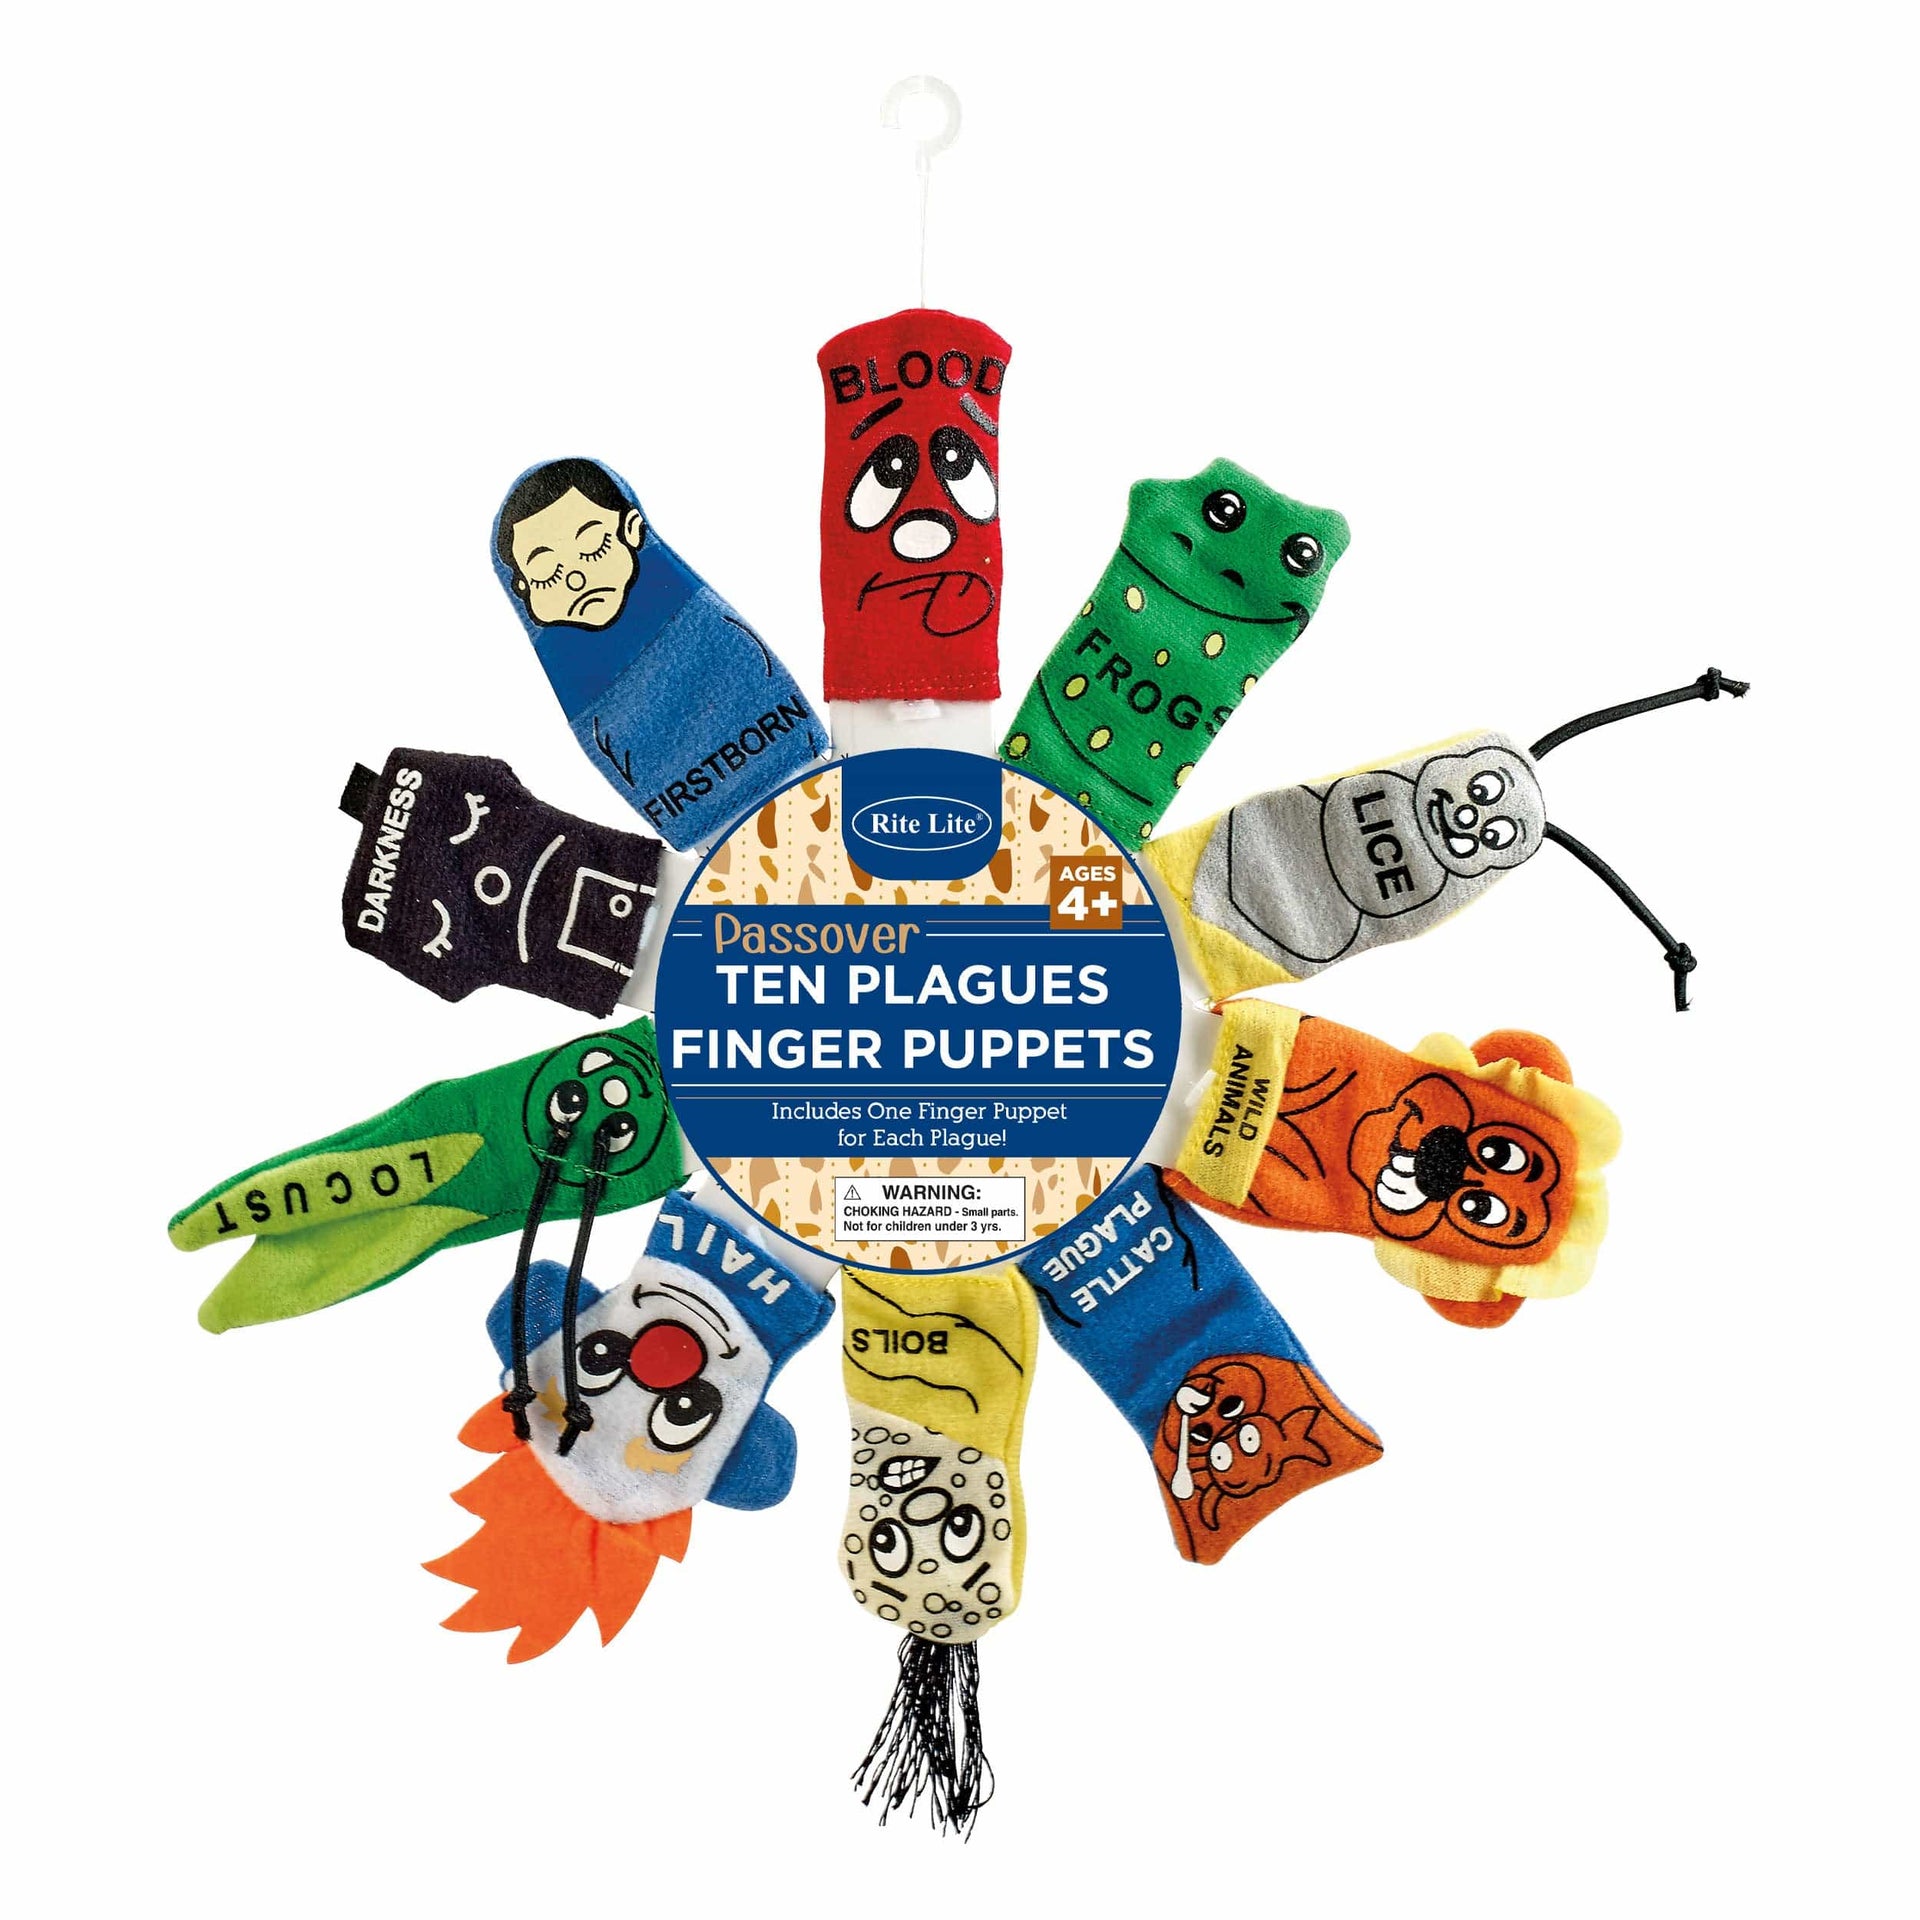 Rite Lite Toys Passover 10 Plagues Finger Puppets